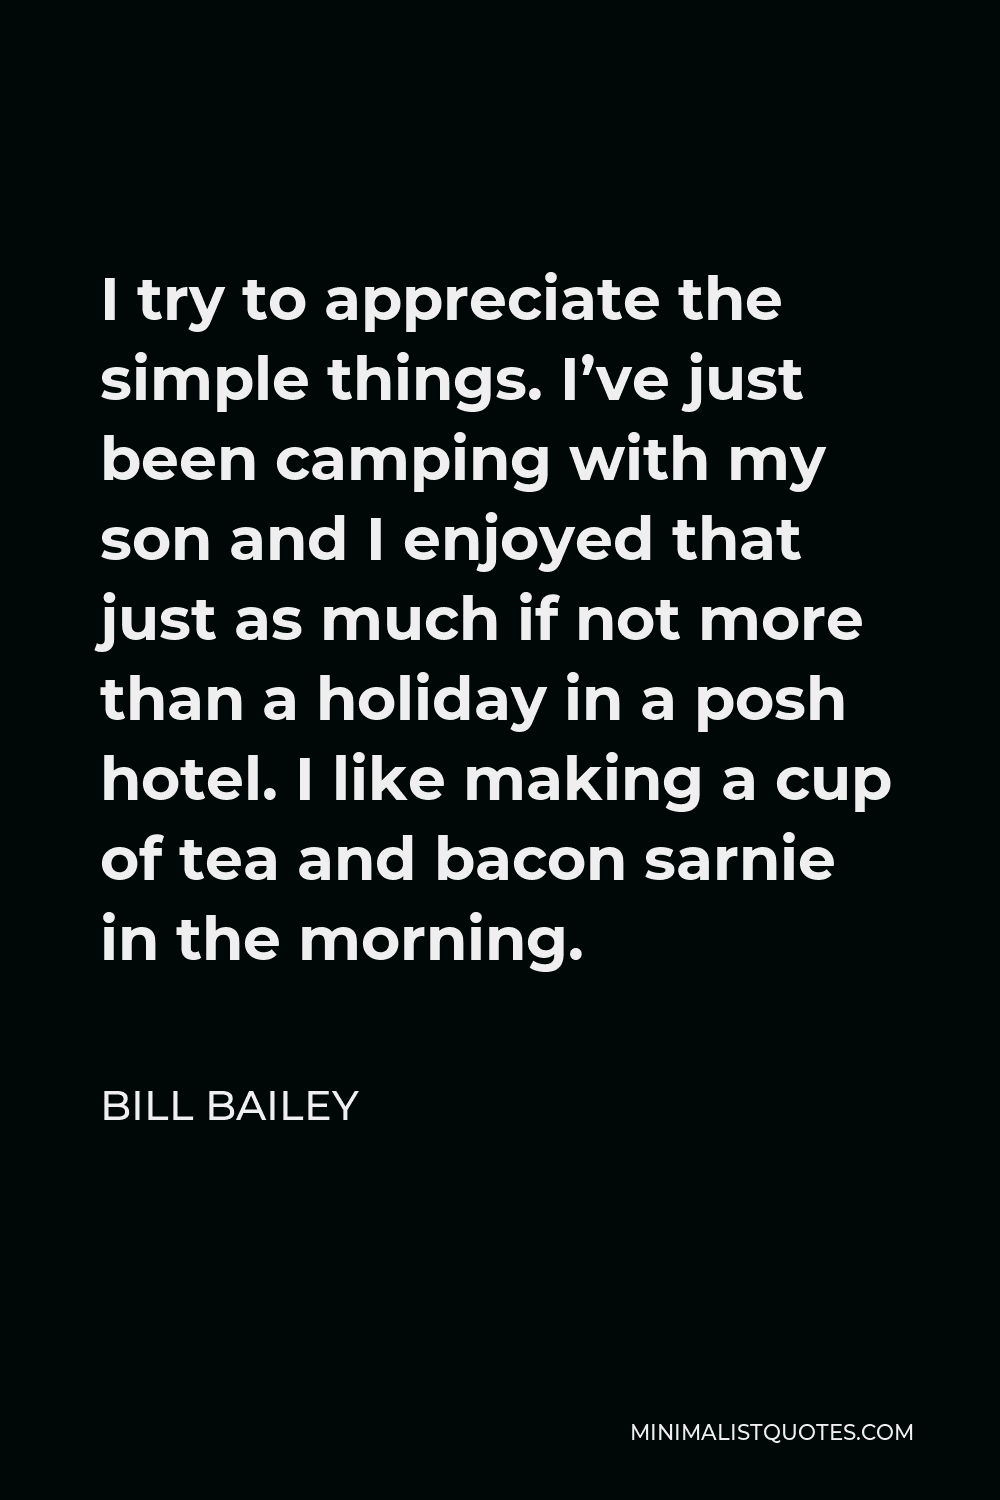 Bill Bailey Quote - I try to appreciate the simple things. I’ve just been camping with my son and I enjoyed that just as much if not more than a holiday in a posh hotel. I like making a cup of tea and bacon sarnie in the morning.